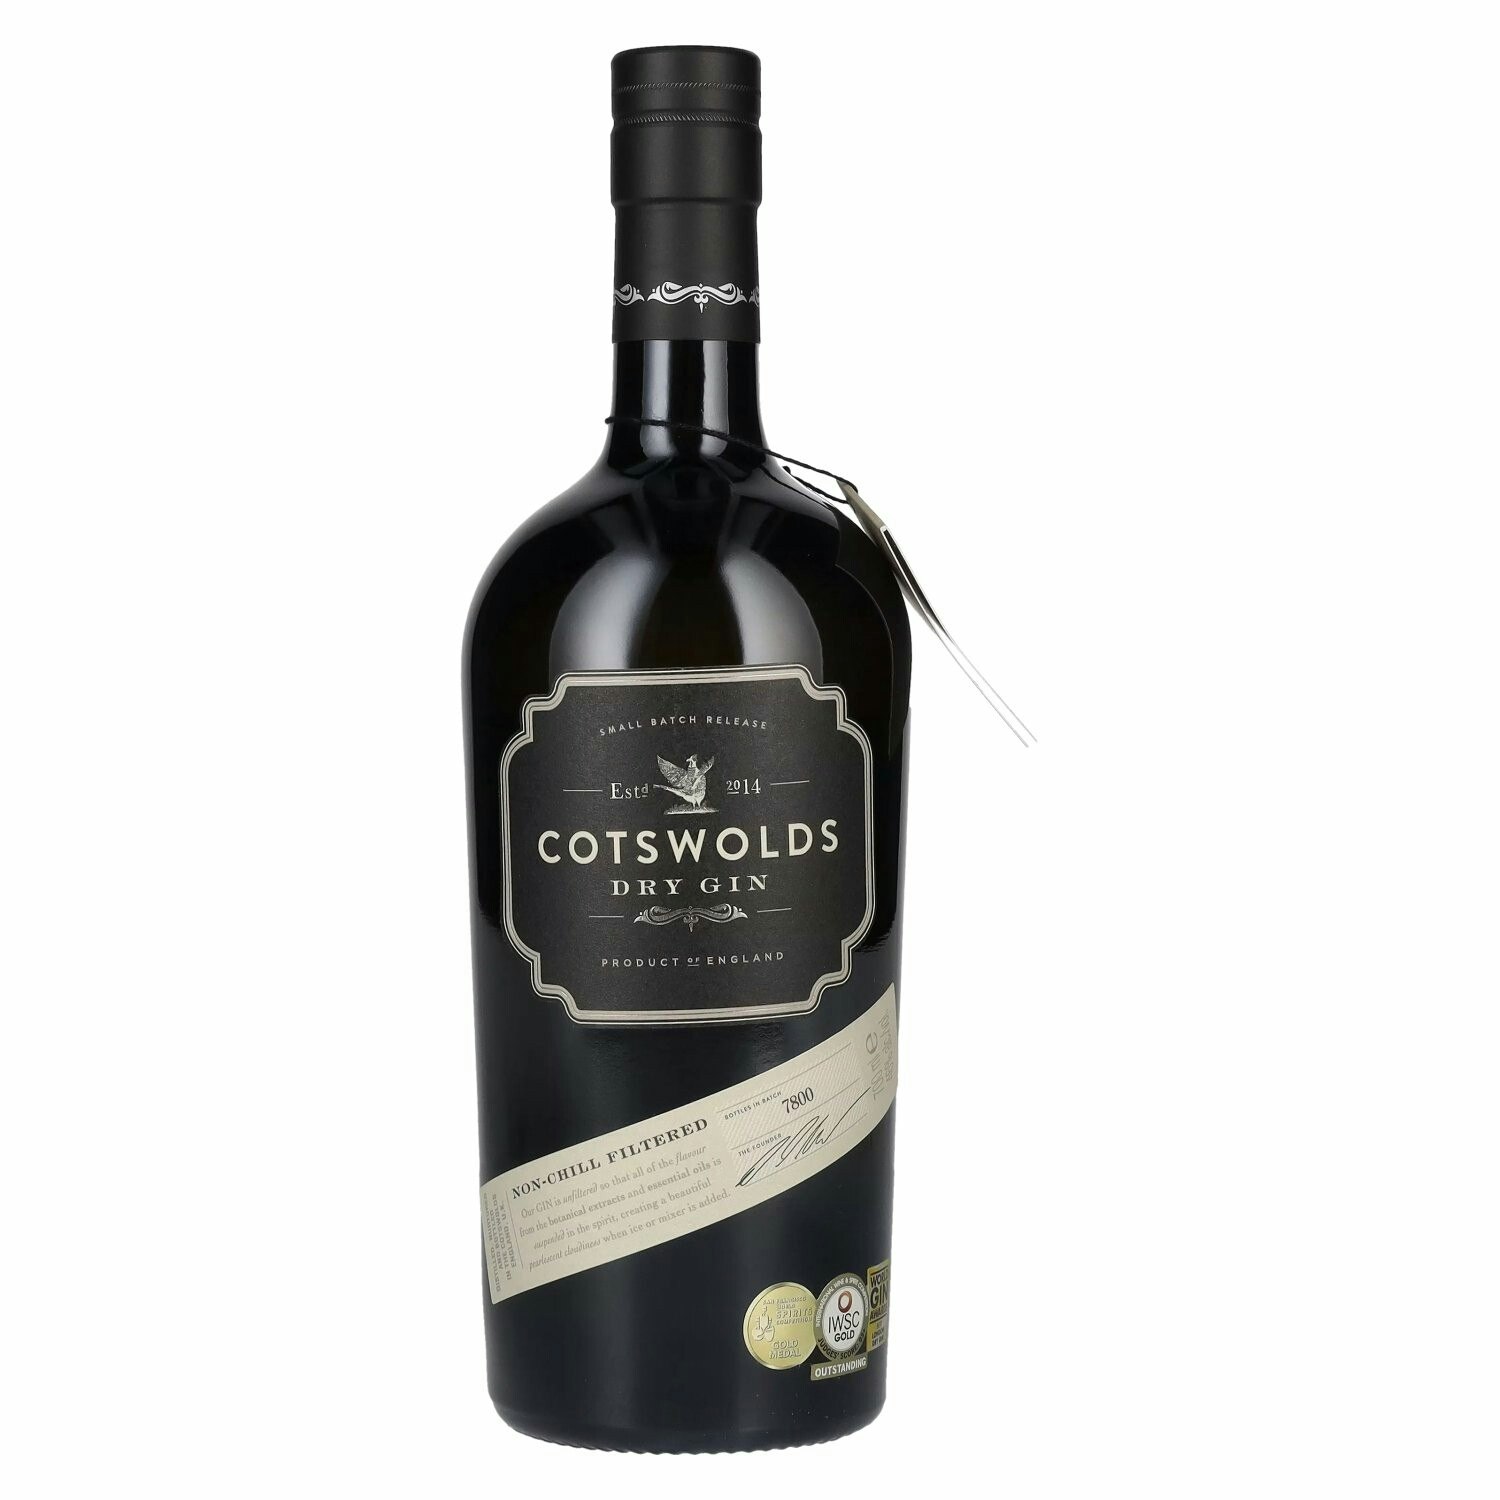 Cotswolds Dry Gin 46% Vol. 0,7l